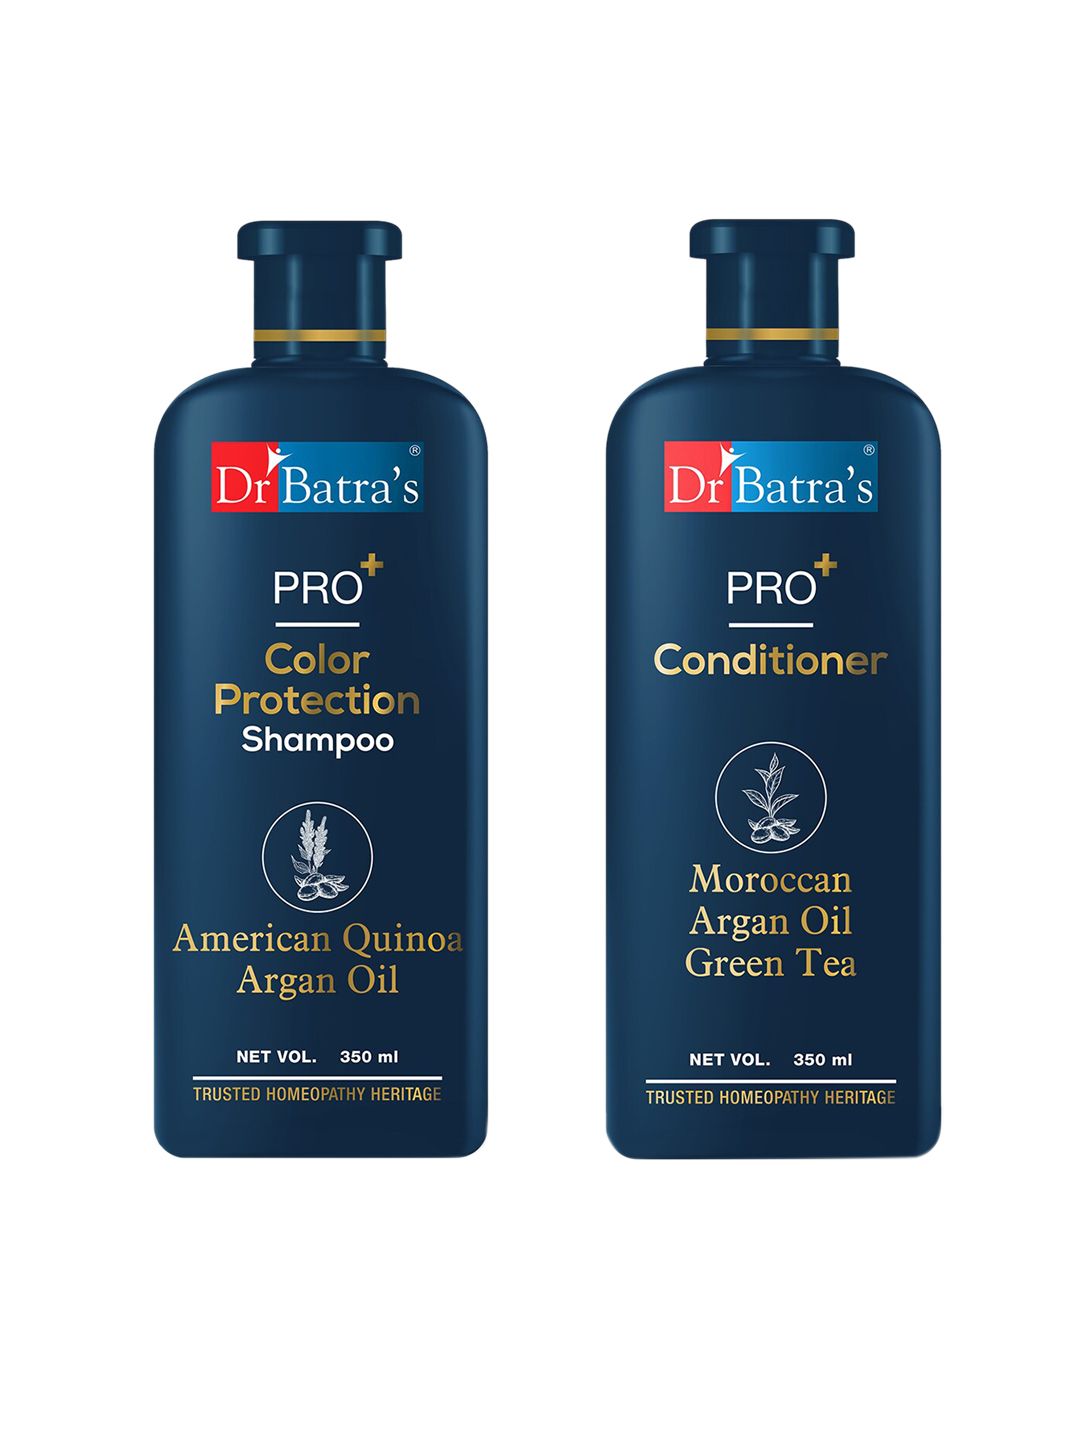 Dr. Batras Set of PRO+ Color Protection Shampoo & Conditioner - 350 ml each Price in India